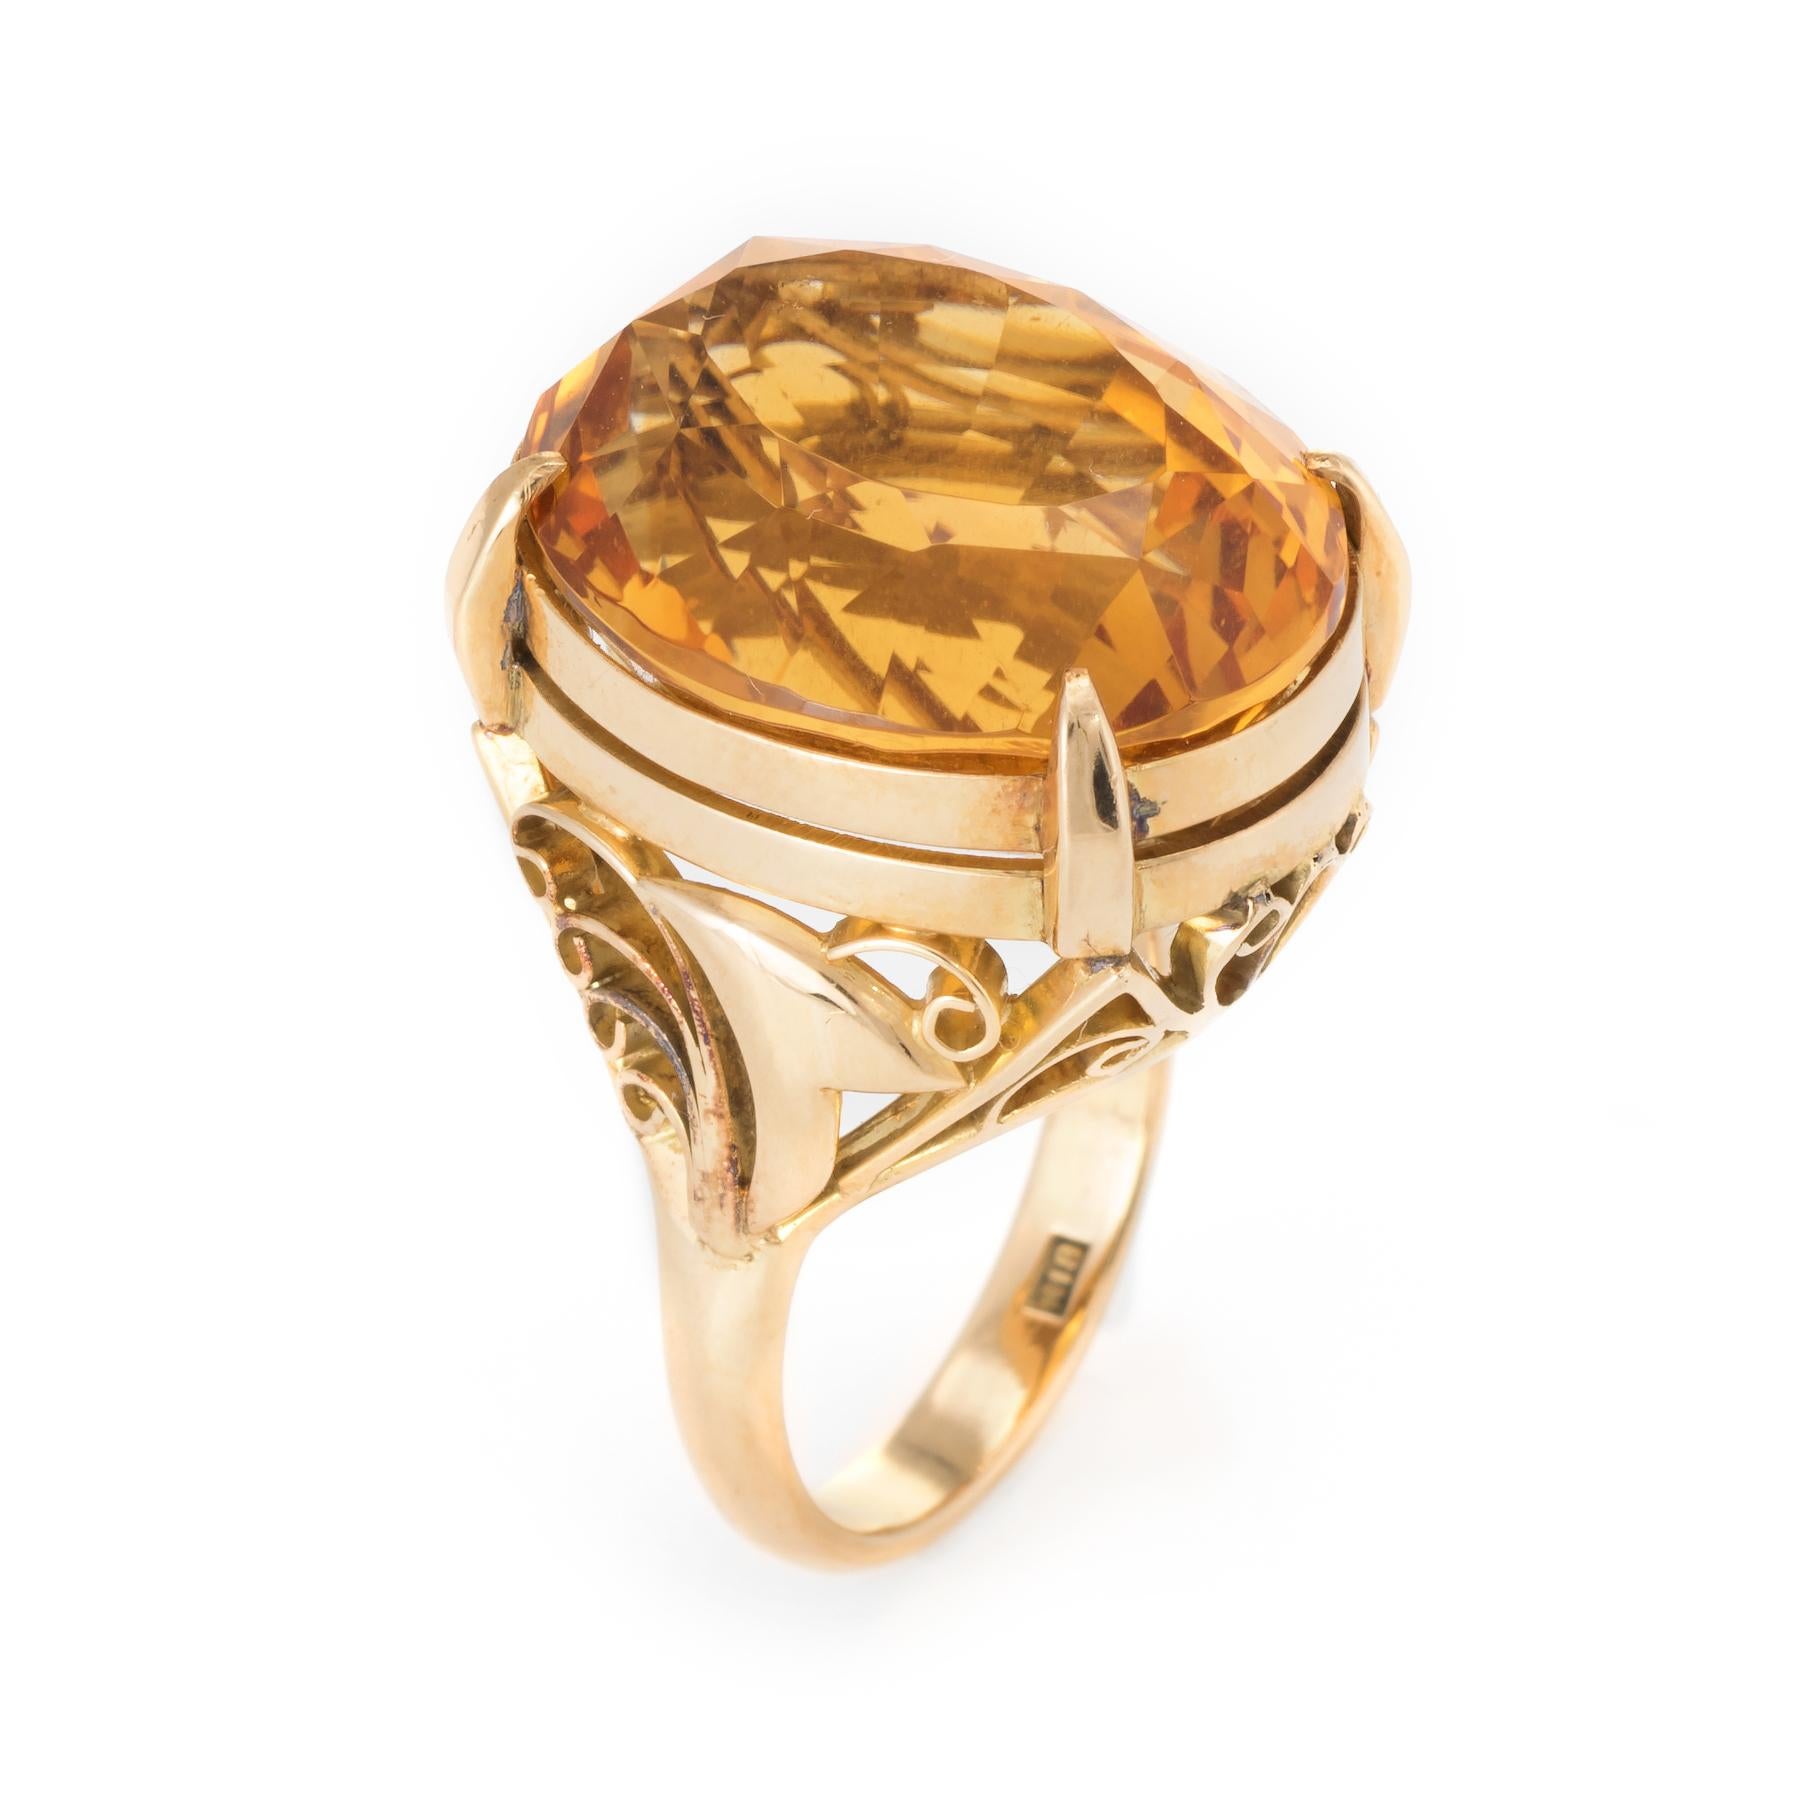 Bold and distinct vintage cocktail ring (circa 1950s to 1960s), crafted in 18 karat yellow gold. 

Oval faceted citrine measures 18mm x 15mm (estimated at 15 carats). The citrine is in excellent condition and free of cracks or chips.   

The citrine